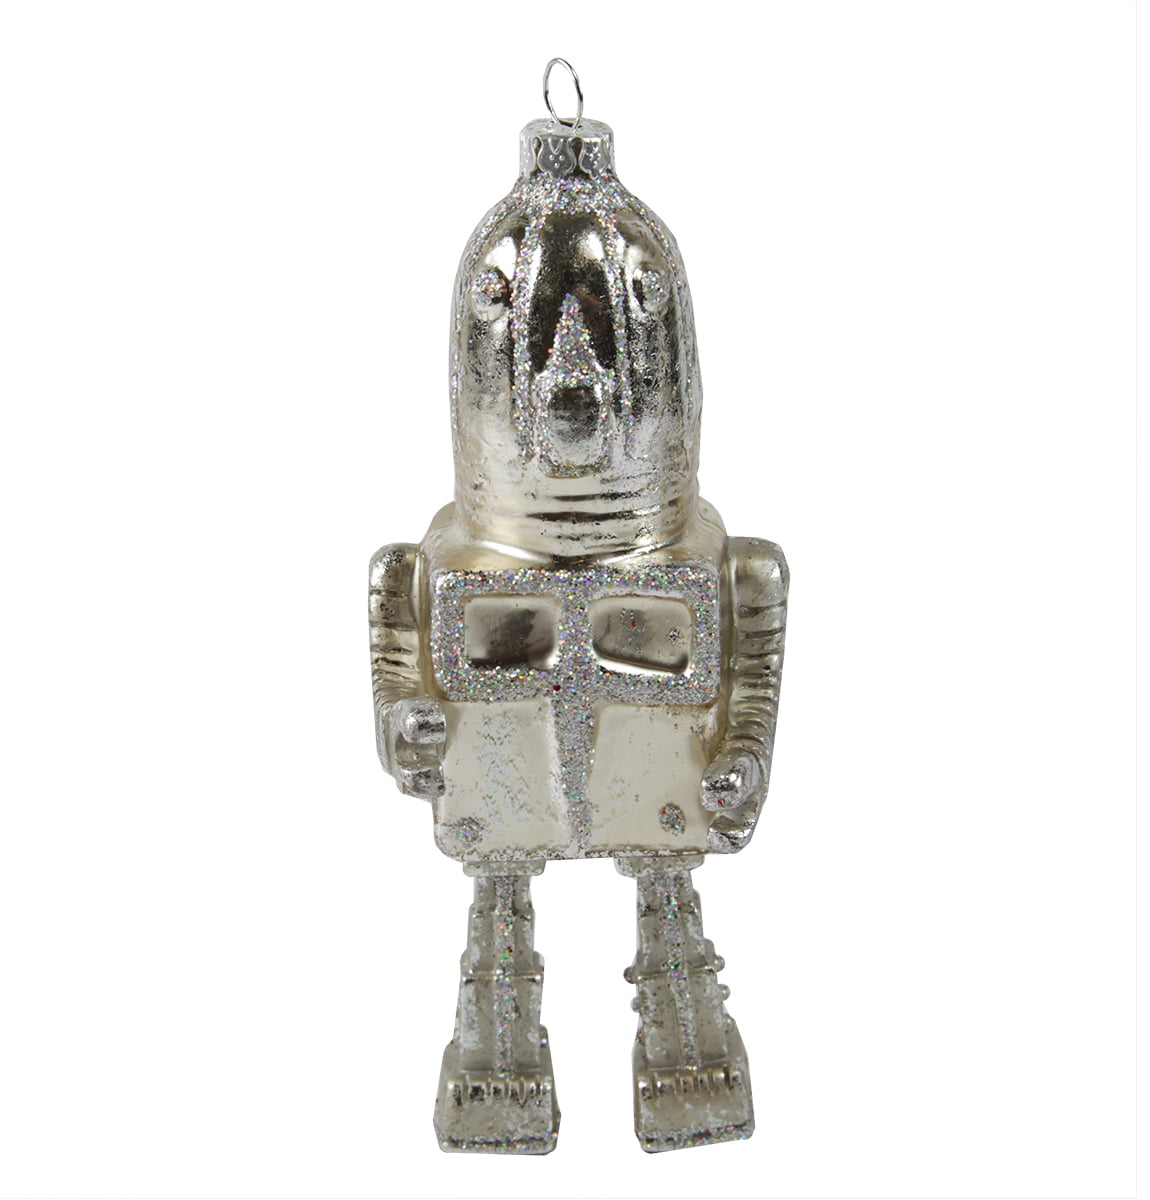 5-Inch Silver and Green Robot Hanging Glass Christmas Ornament 